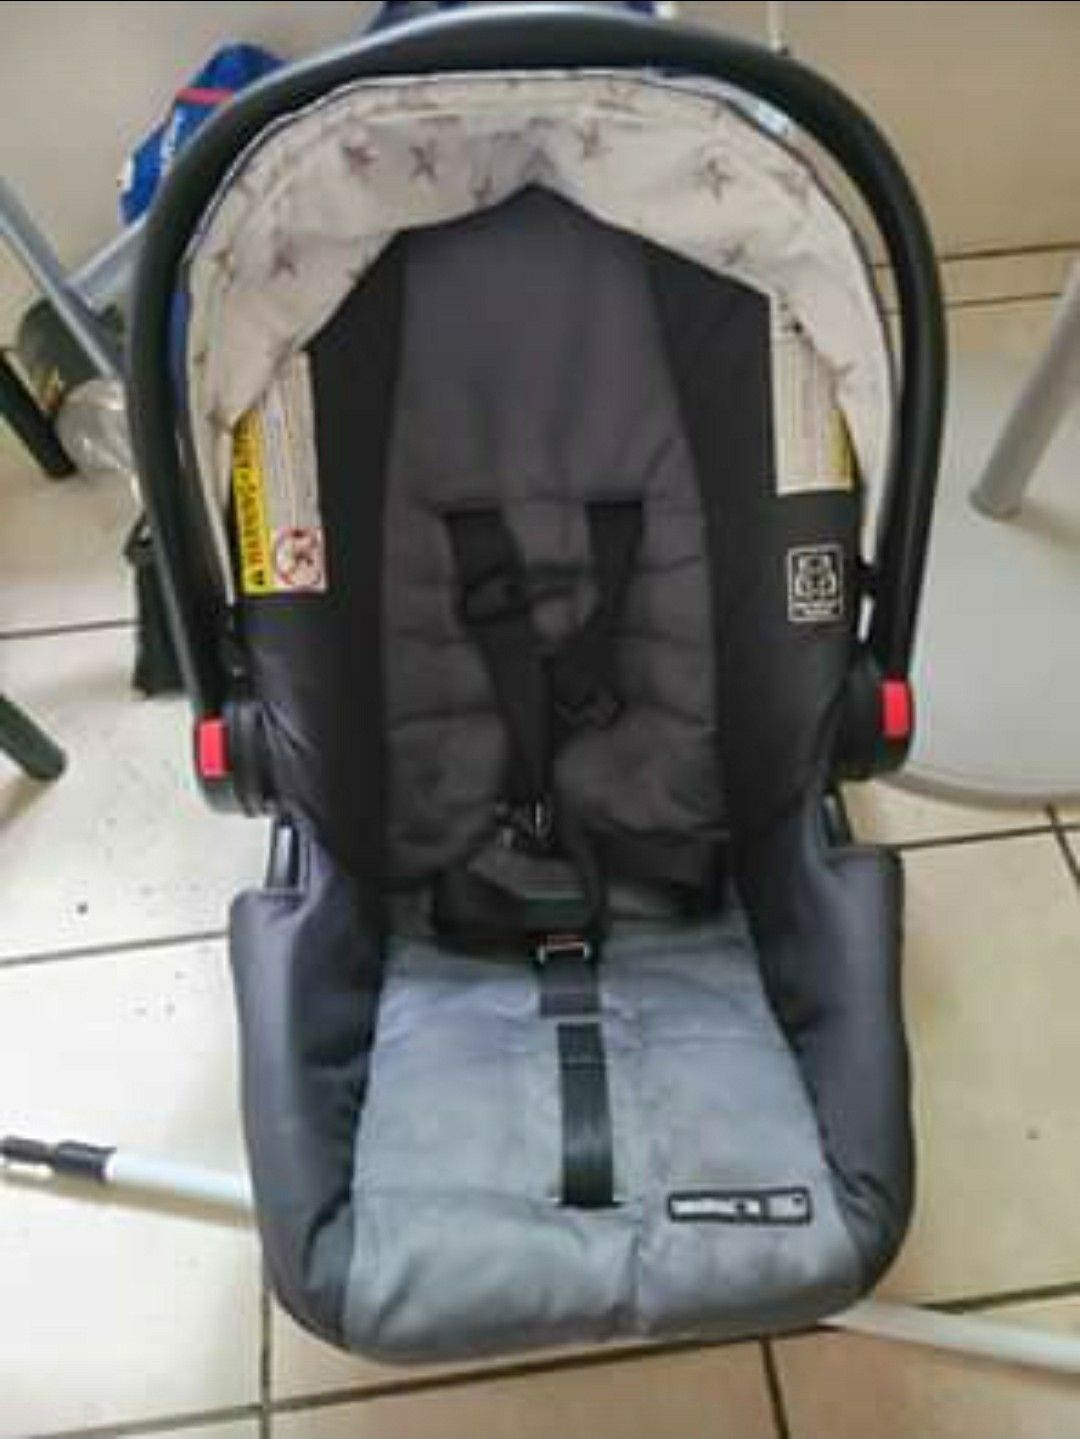 Grayco car seat only used a few times